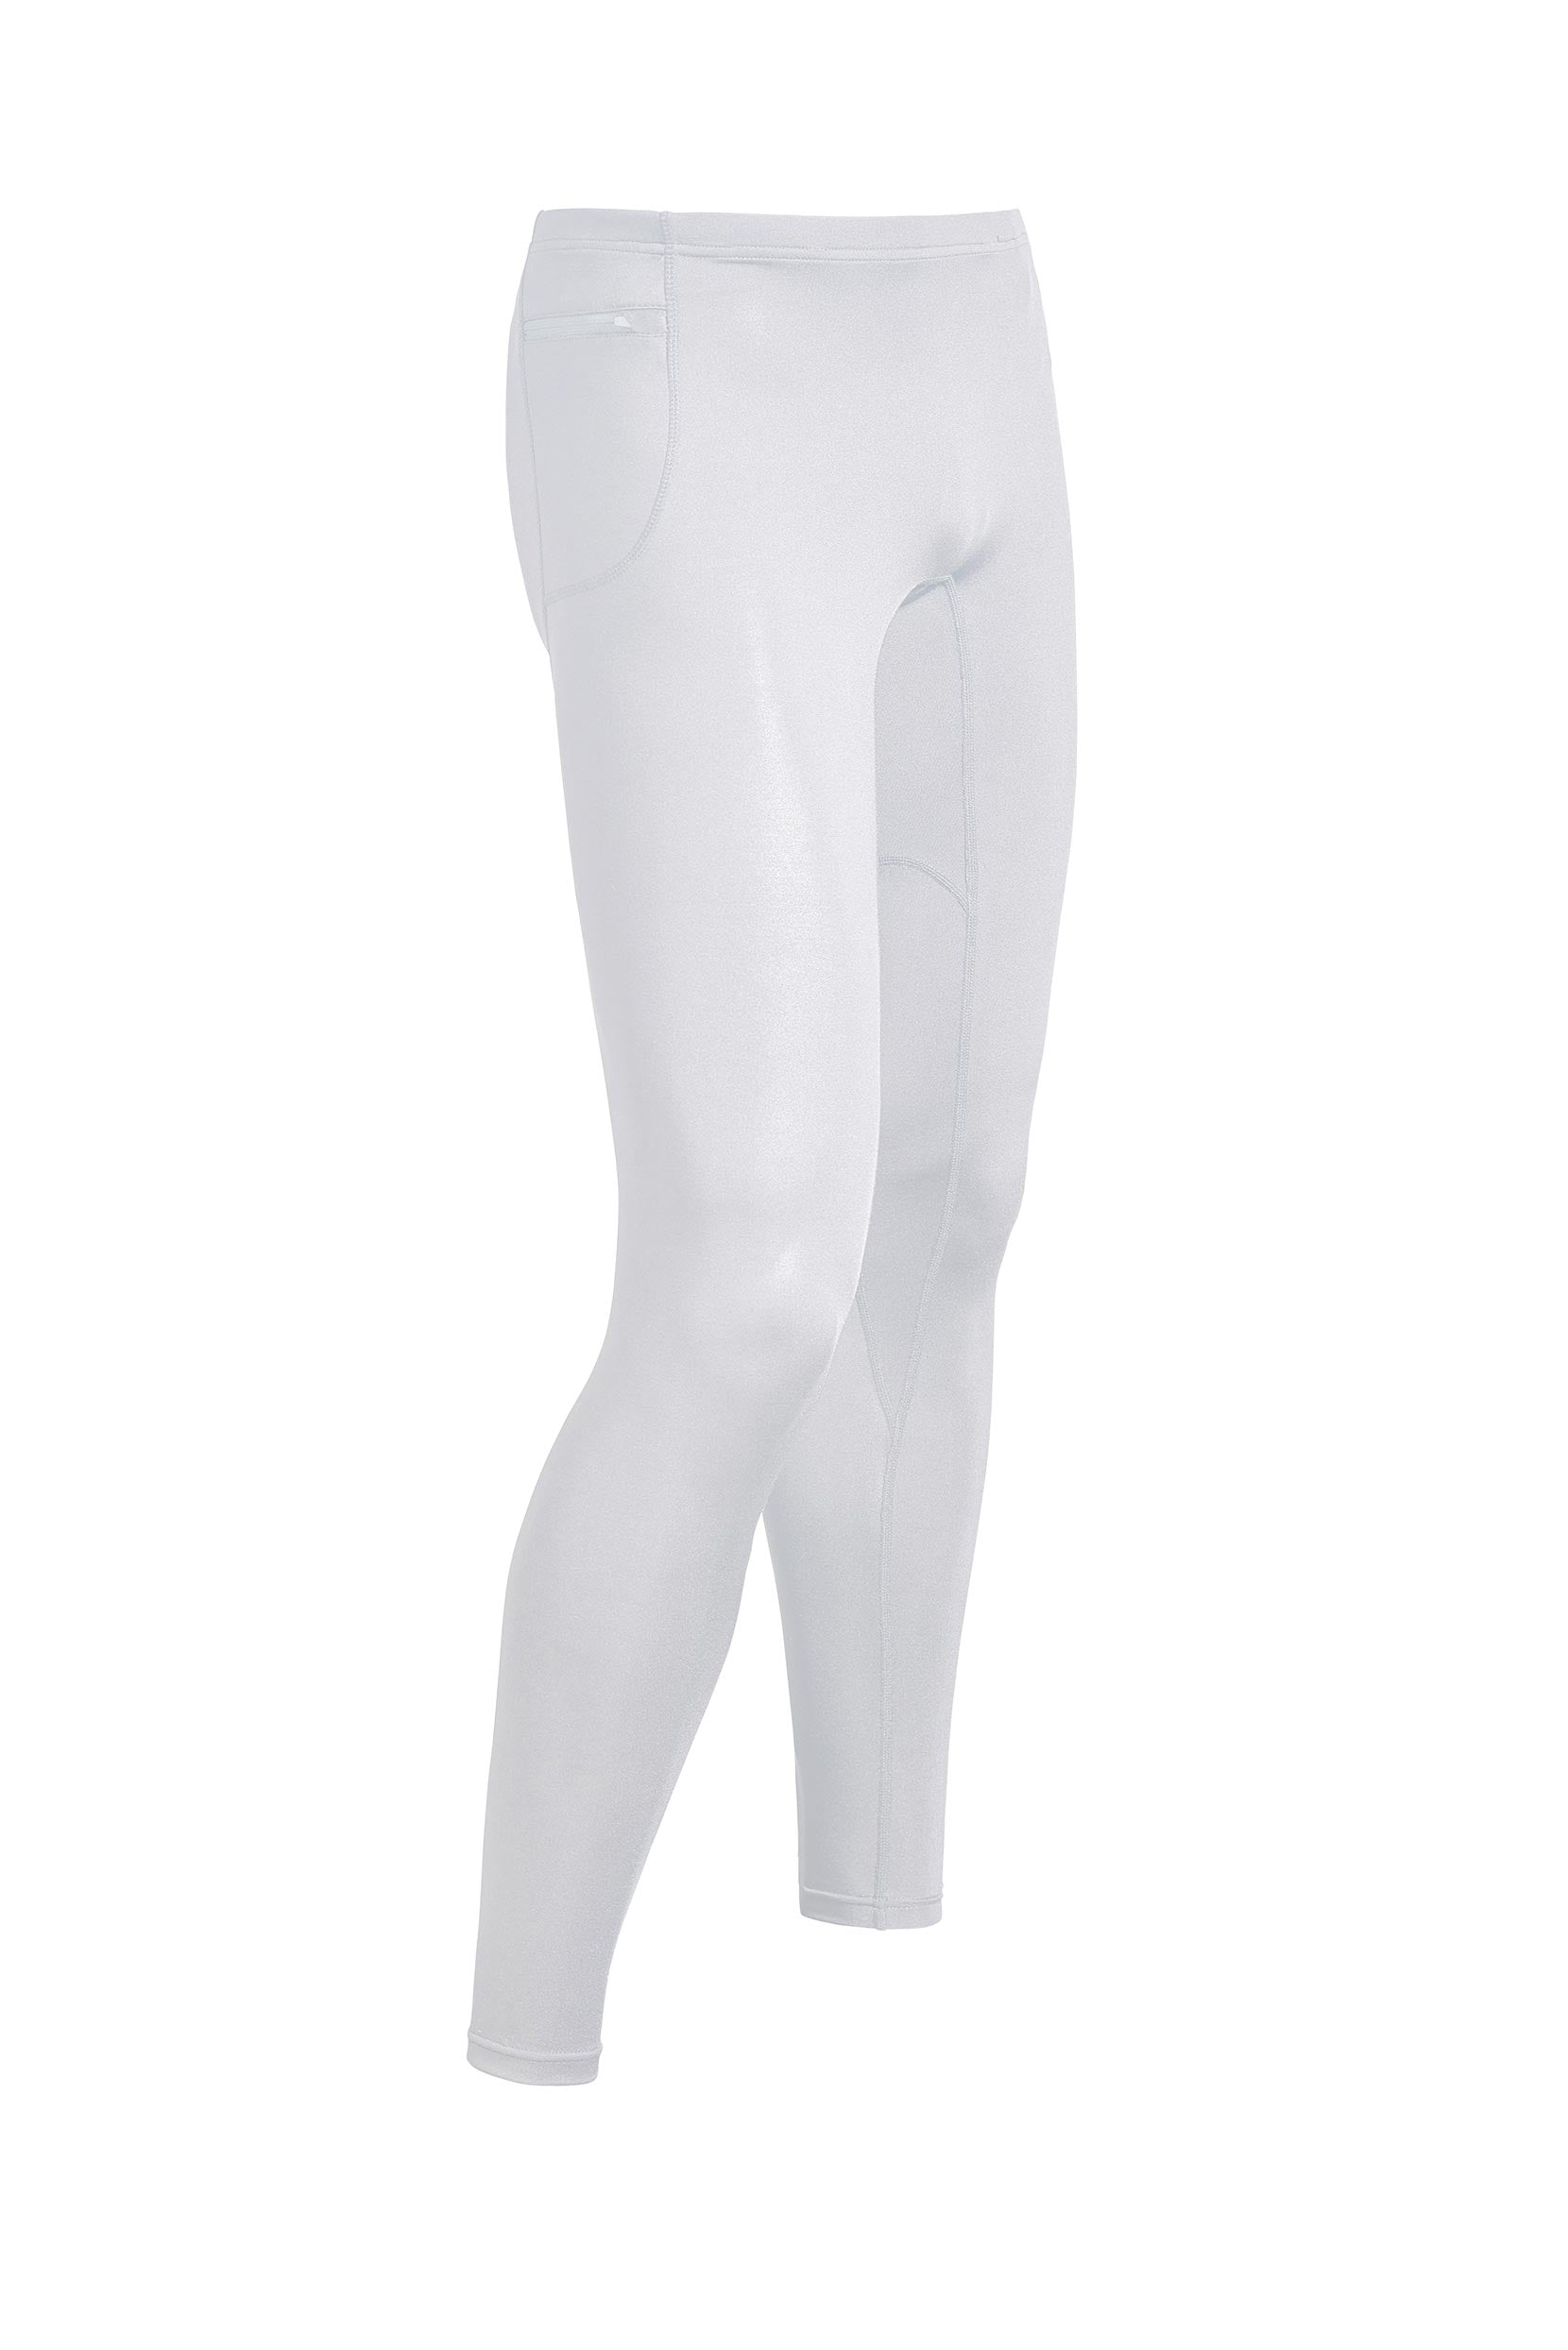 Airstretch™ Running Tights